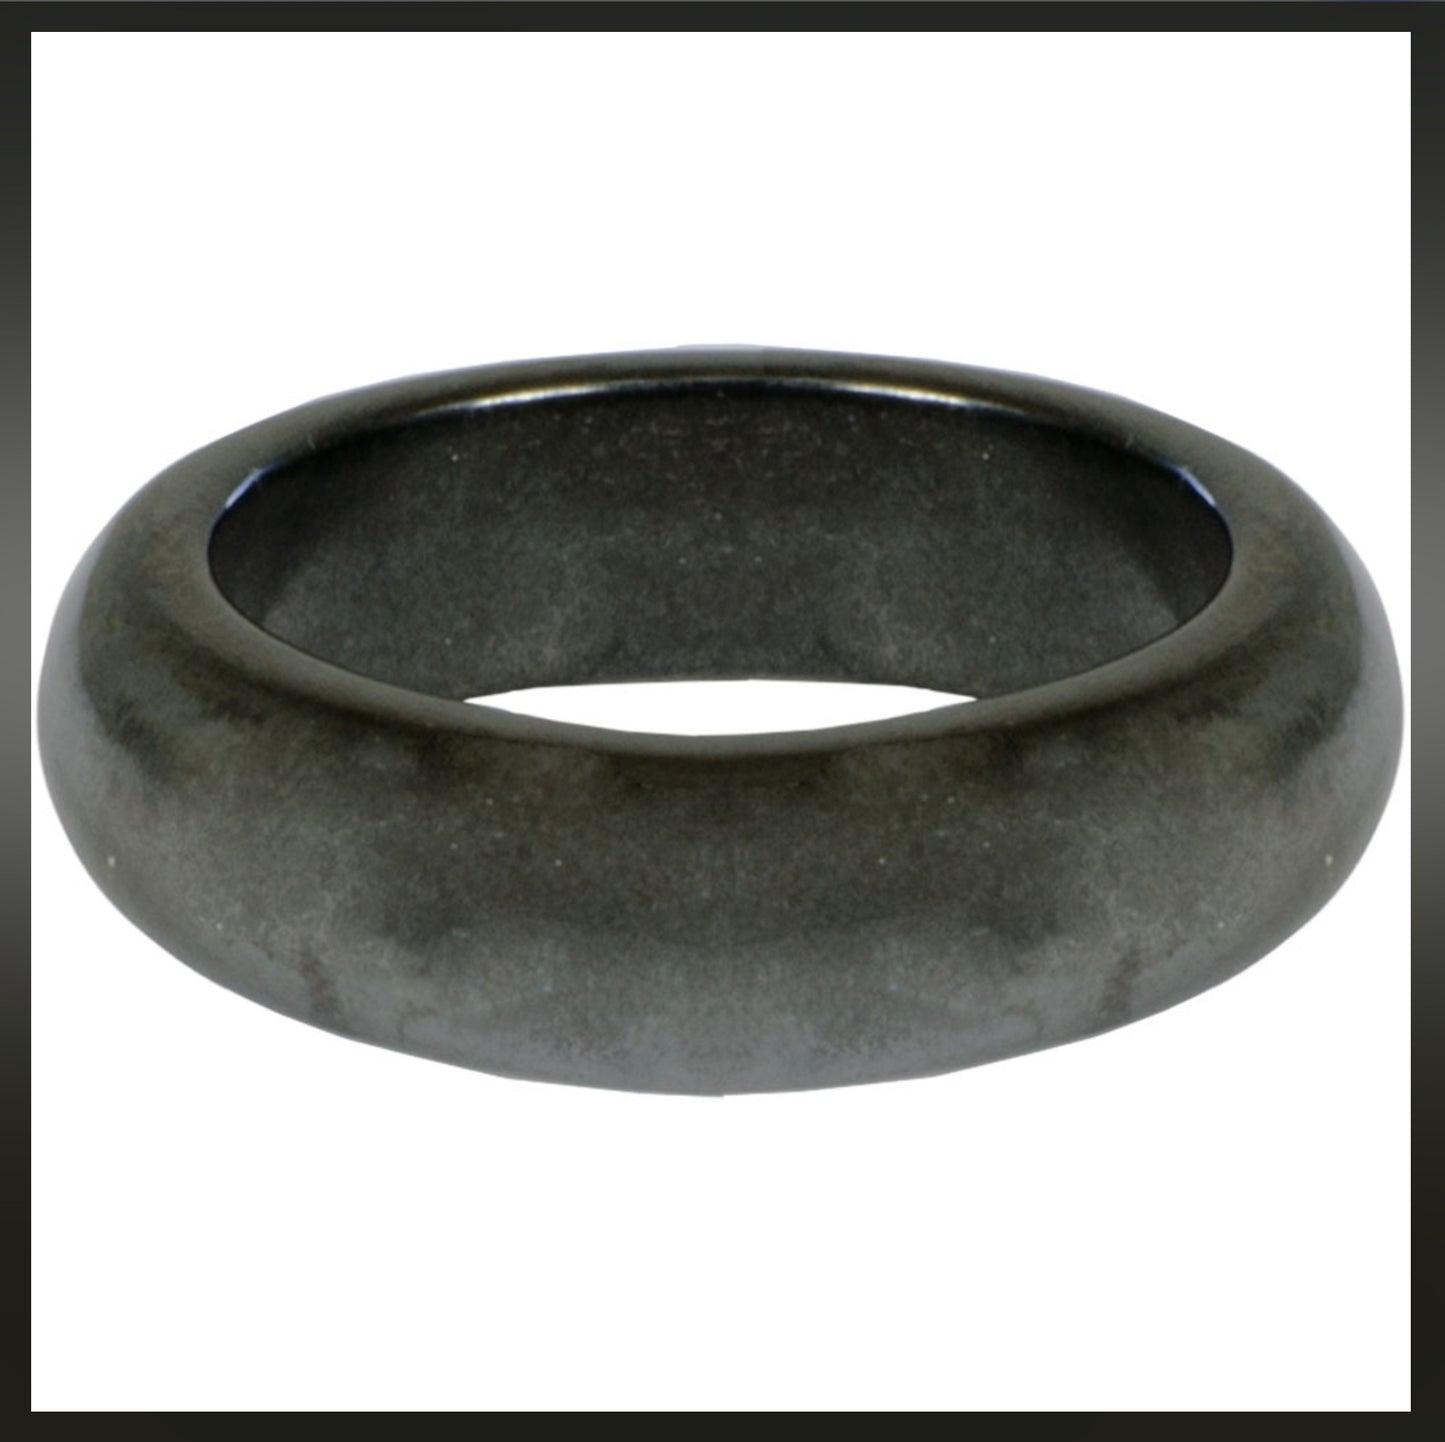 Hematite Ring Plain Round Band Magnetic - Oops, it broke!!